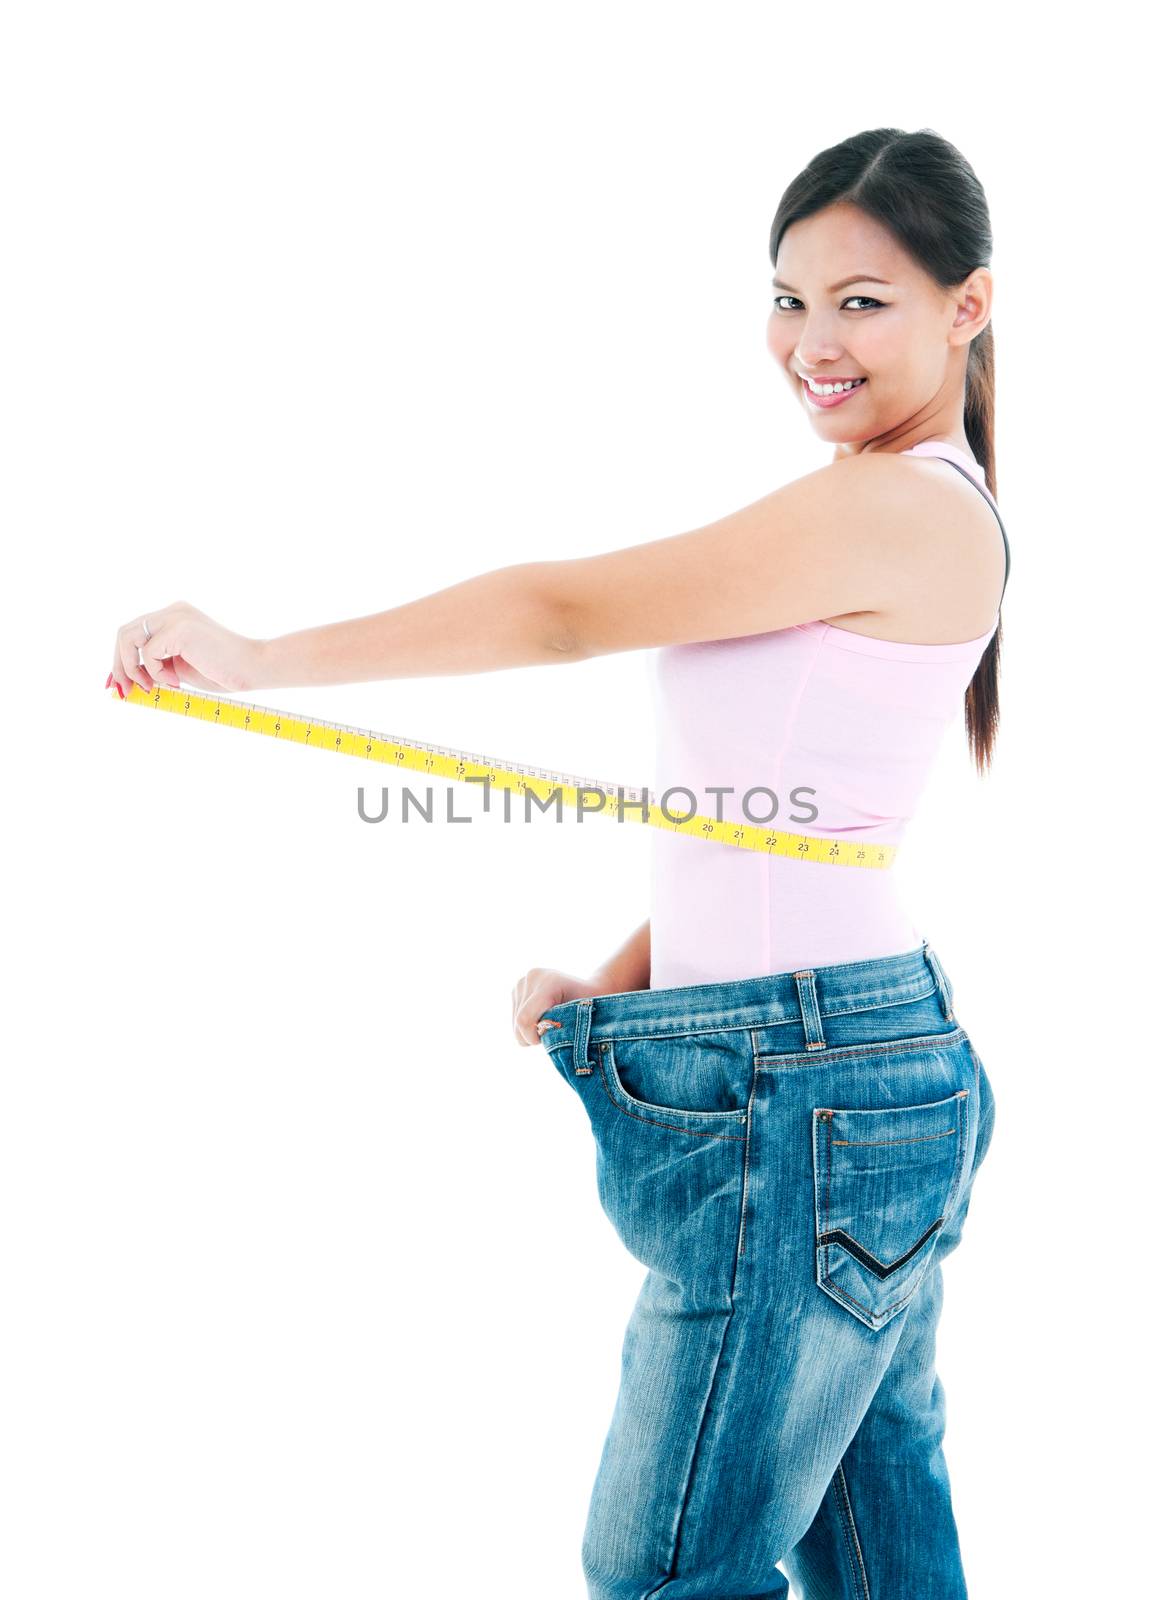 Portrait of an attractive young woman measuring her waist after losing weight over white background.